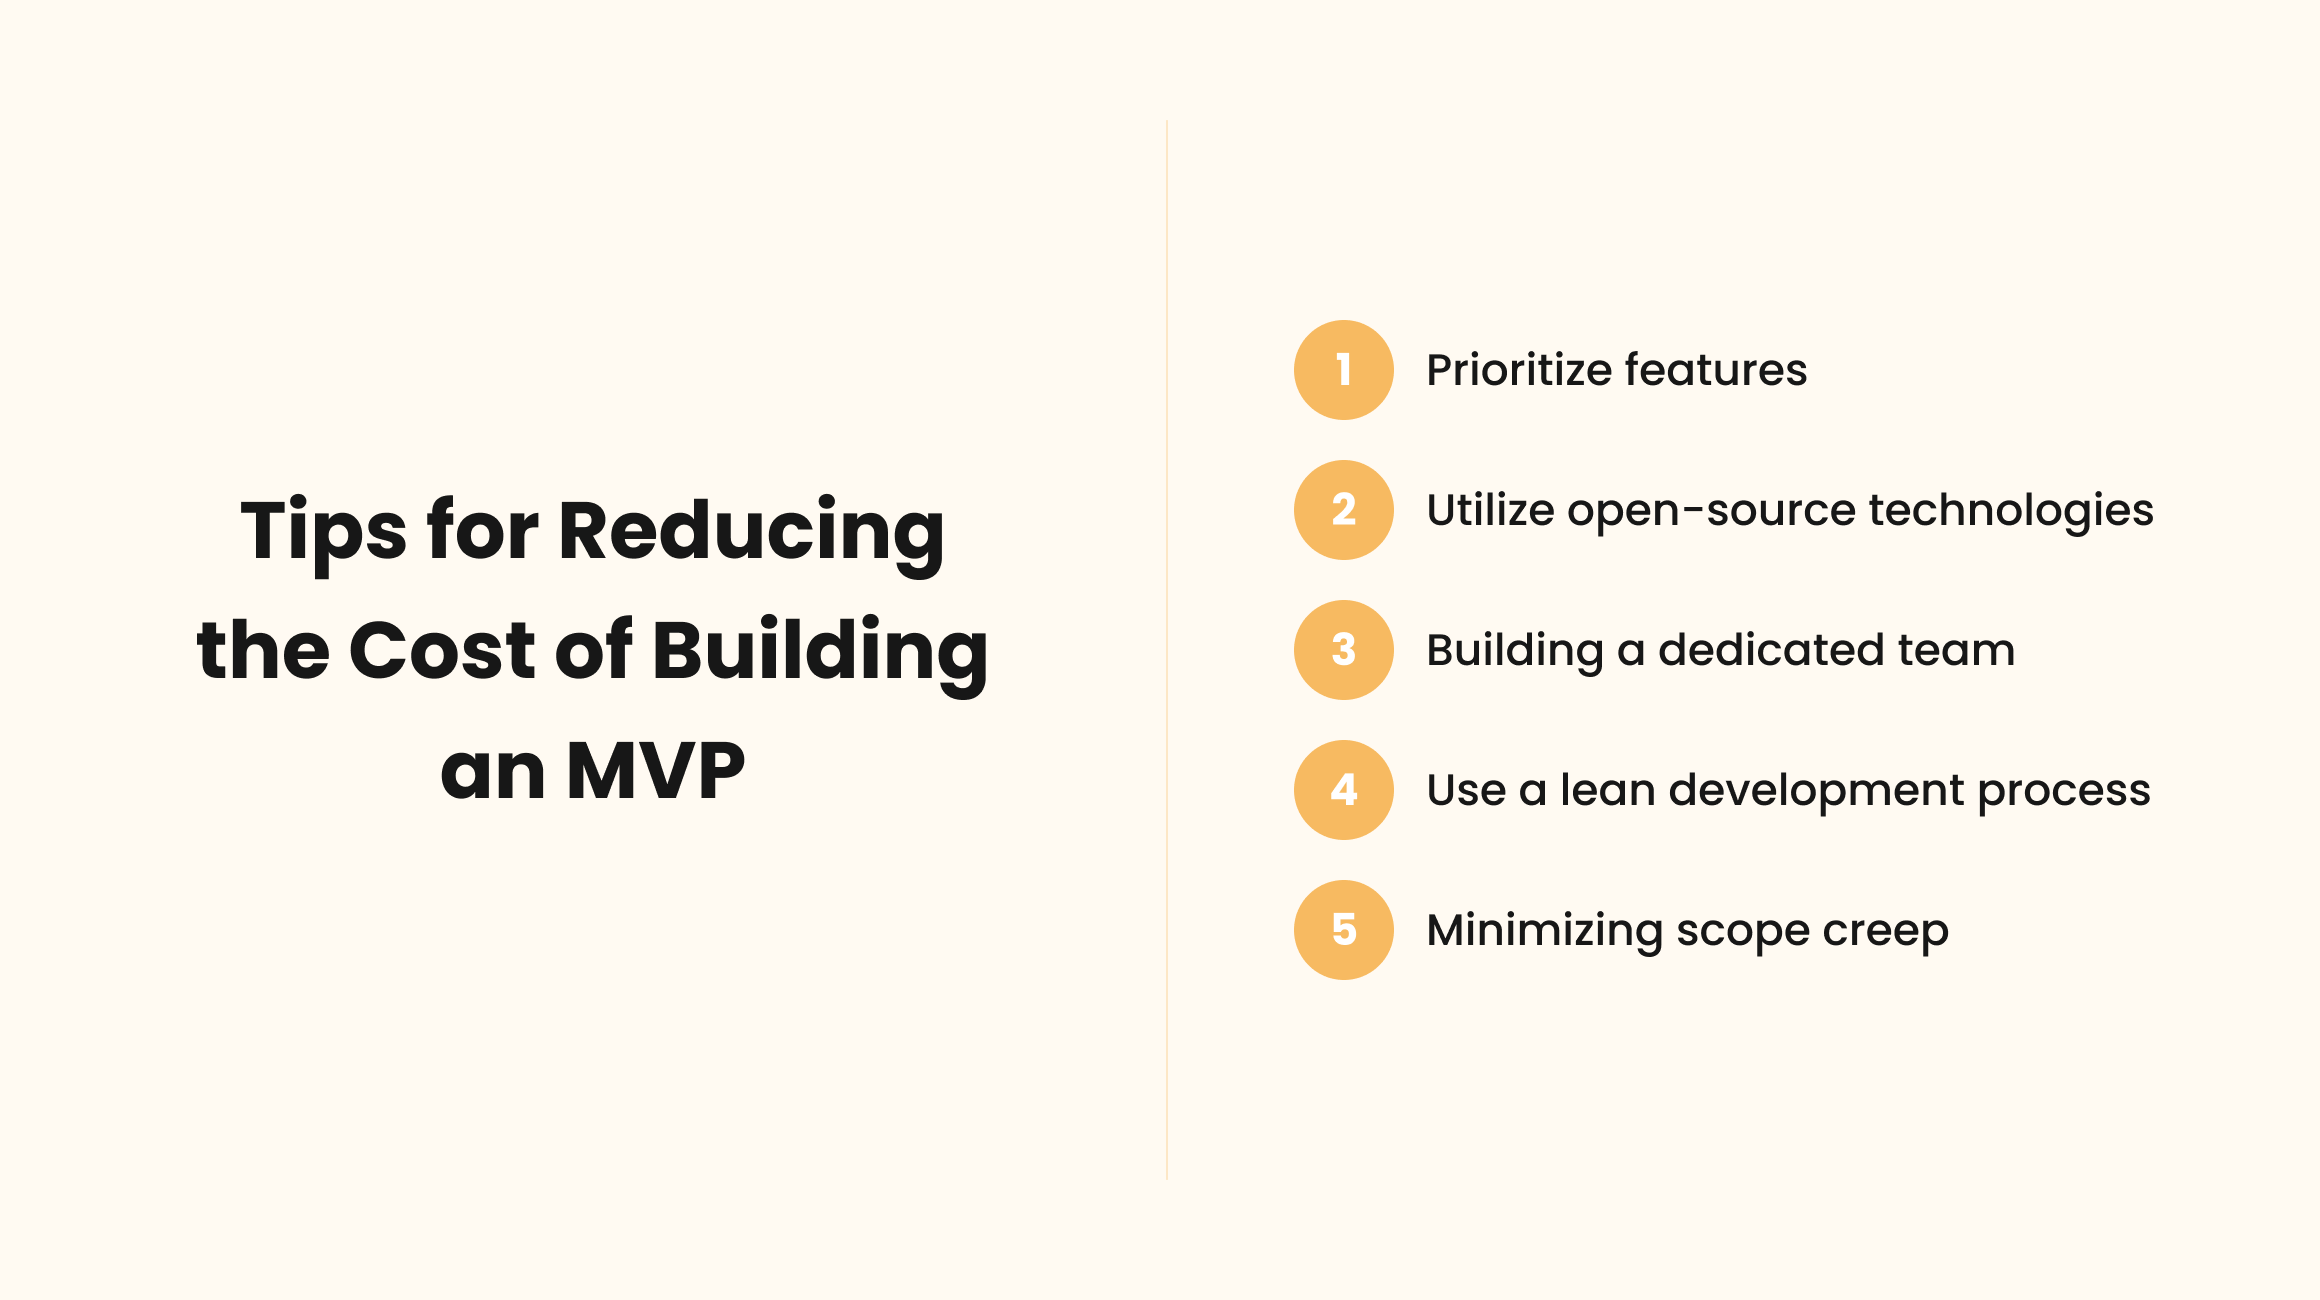 Tips for reducing MVP costs